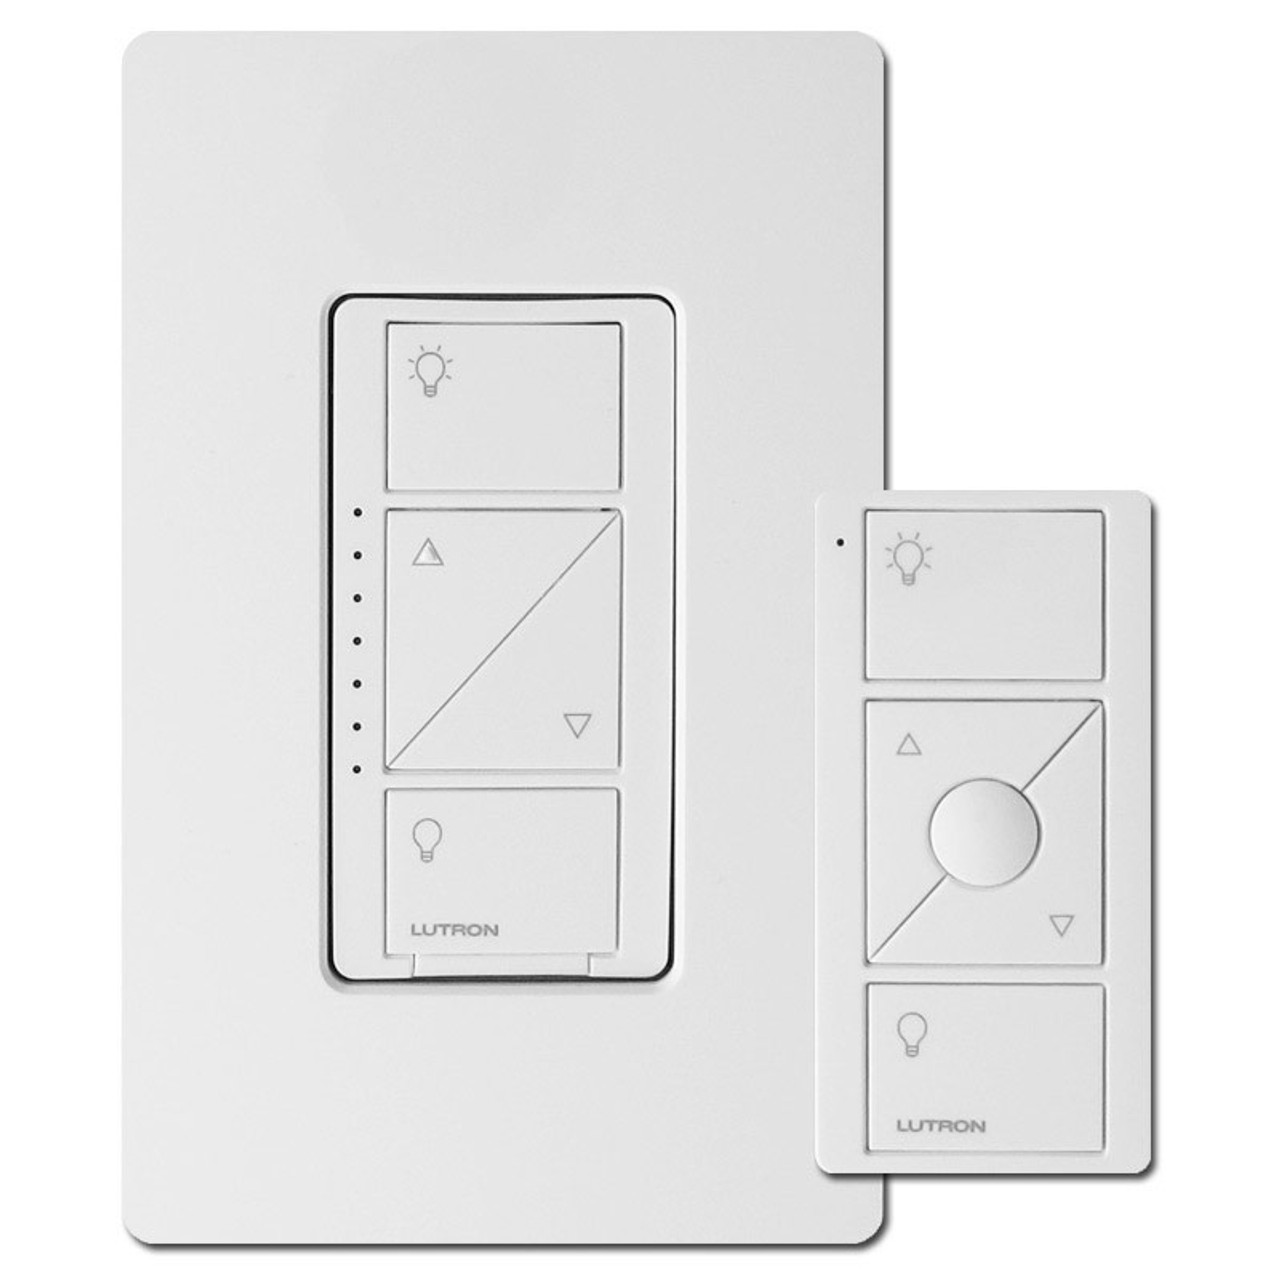 Caseta Plug-in Lamp Dimmer with Pico Remote Control Kit by Lutron, P-PKG1P-WH